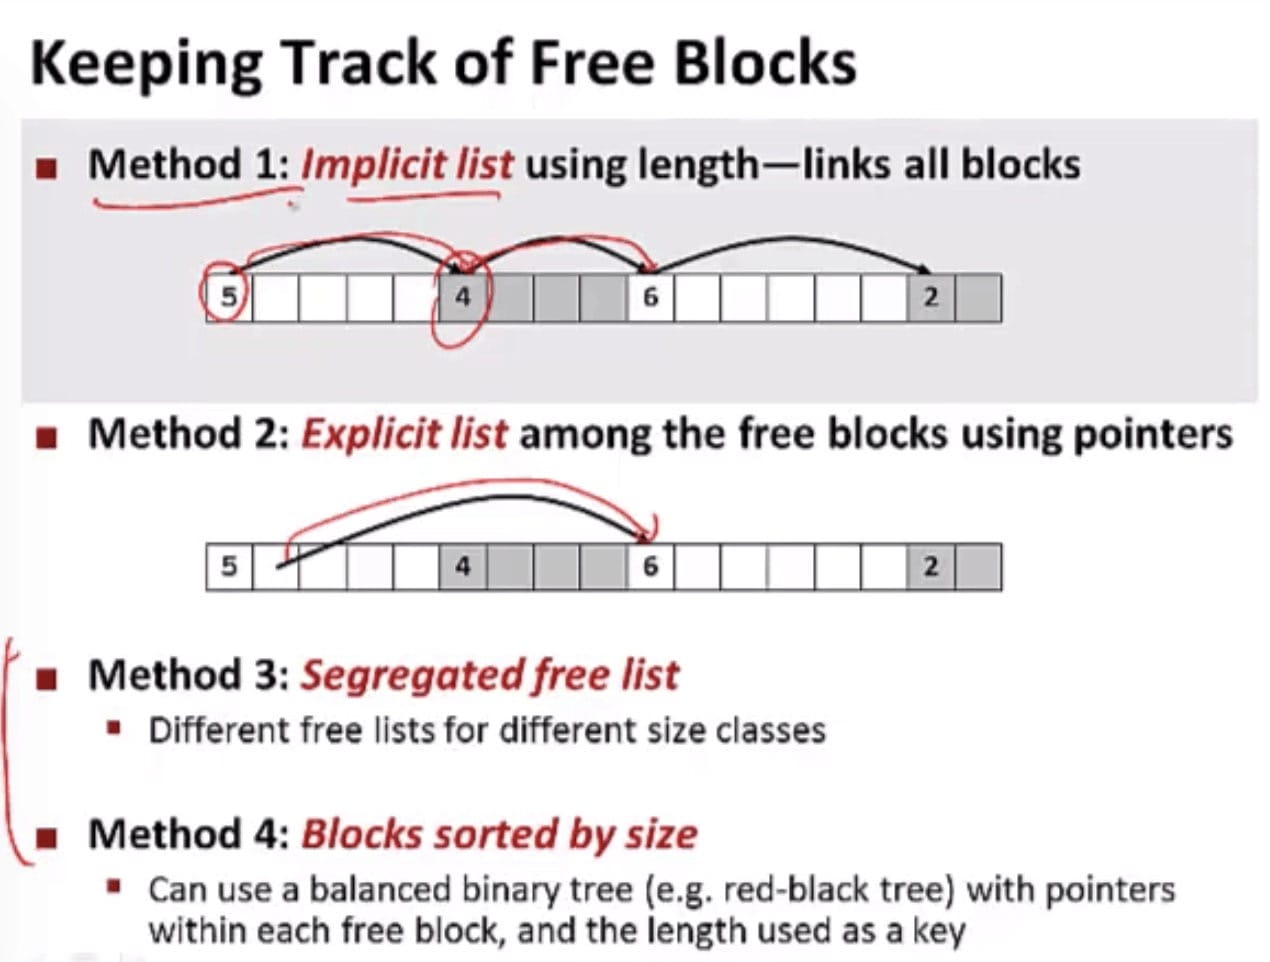 Keeping Track of Free Blocks (CSE 351 - Memory Allocation, Video 3: Implementation)